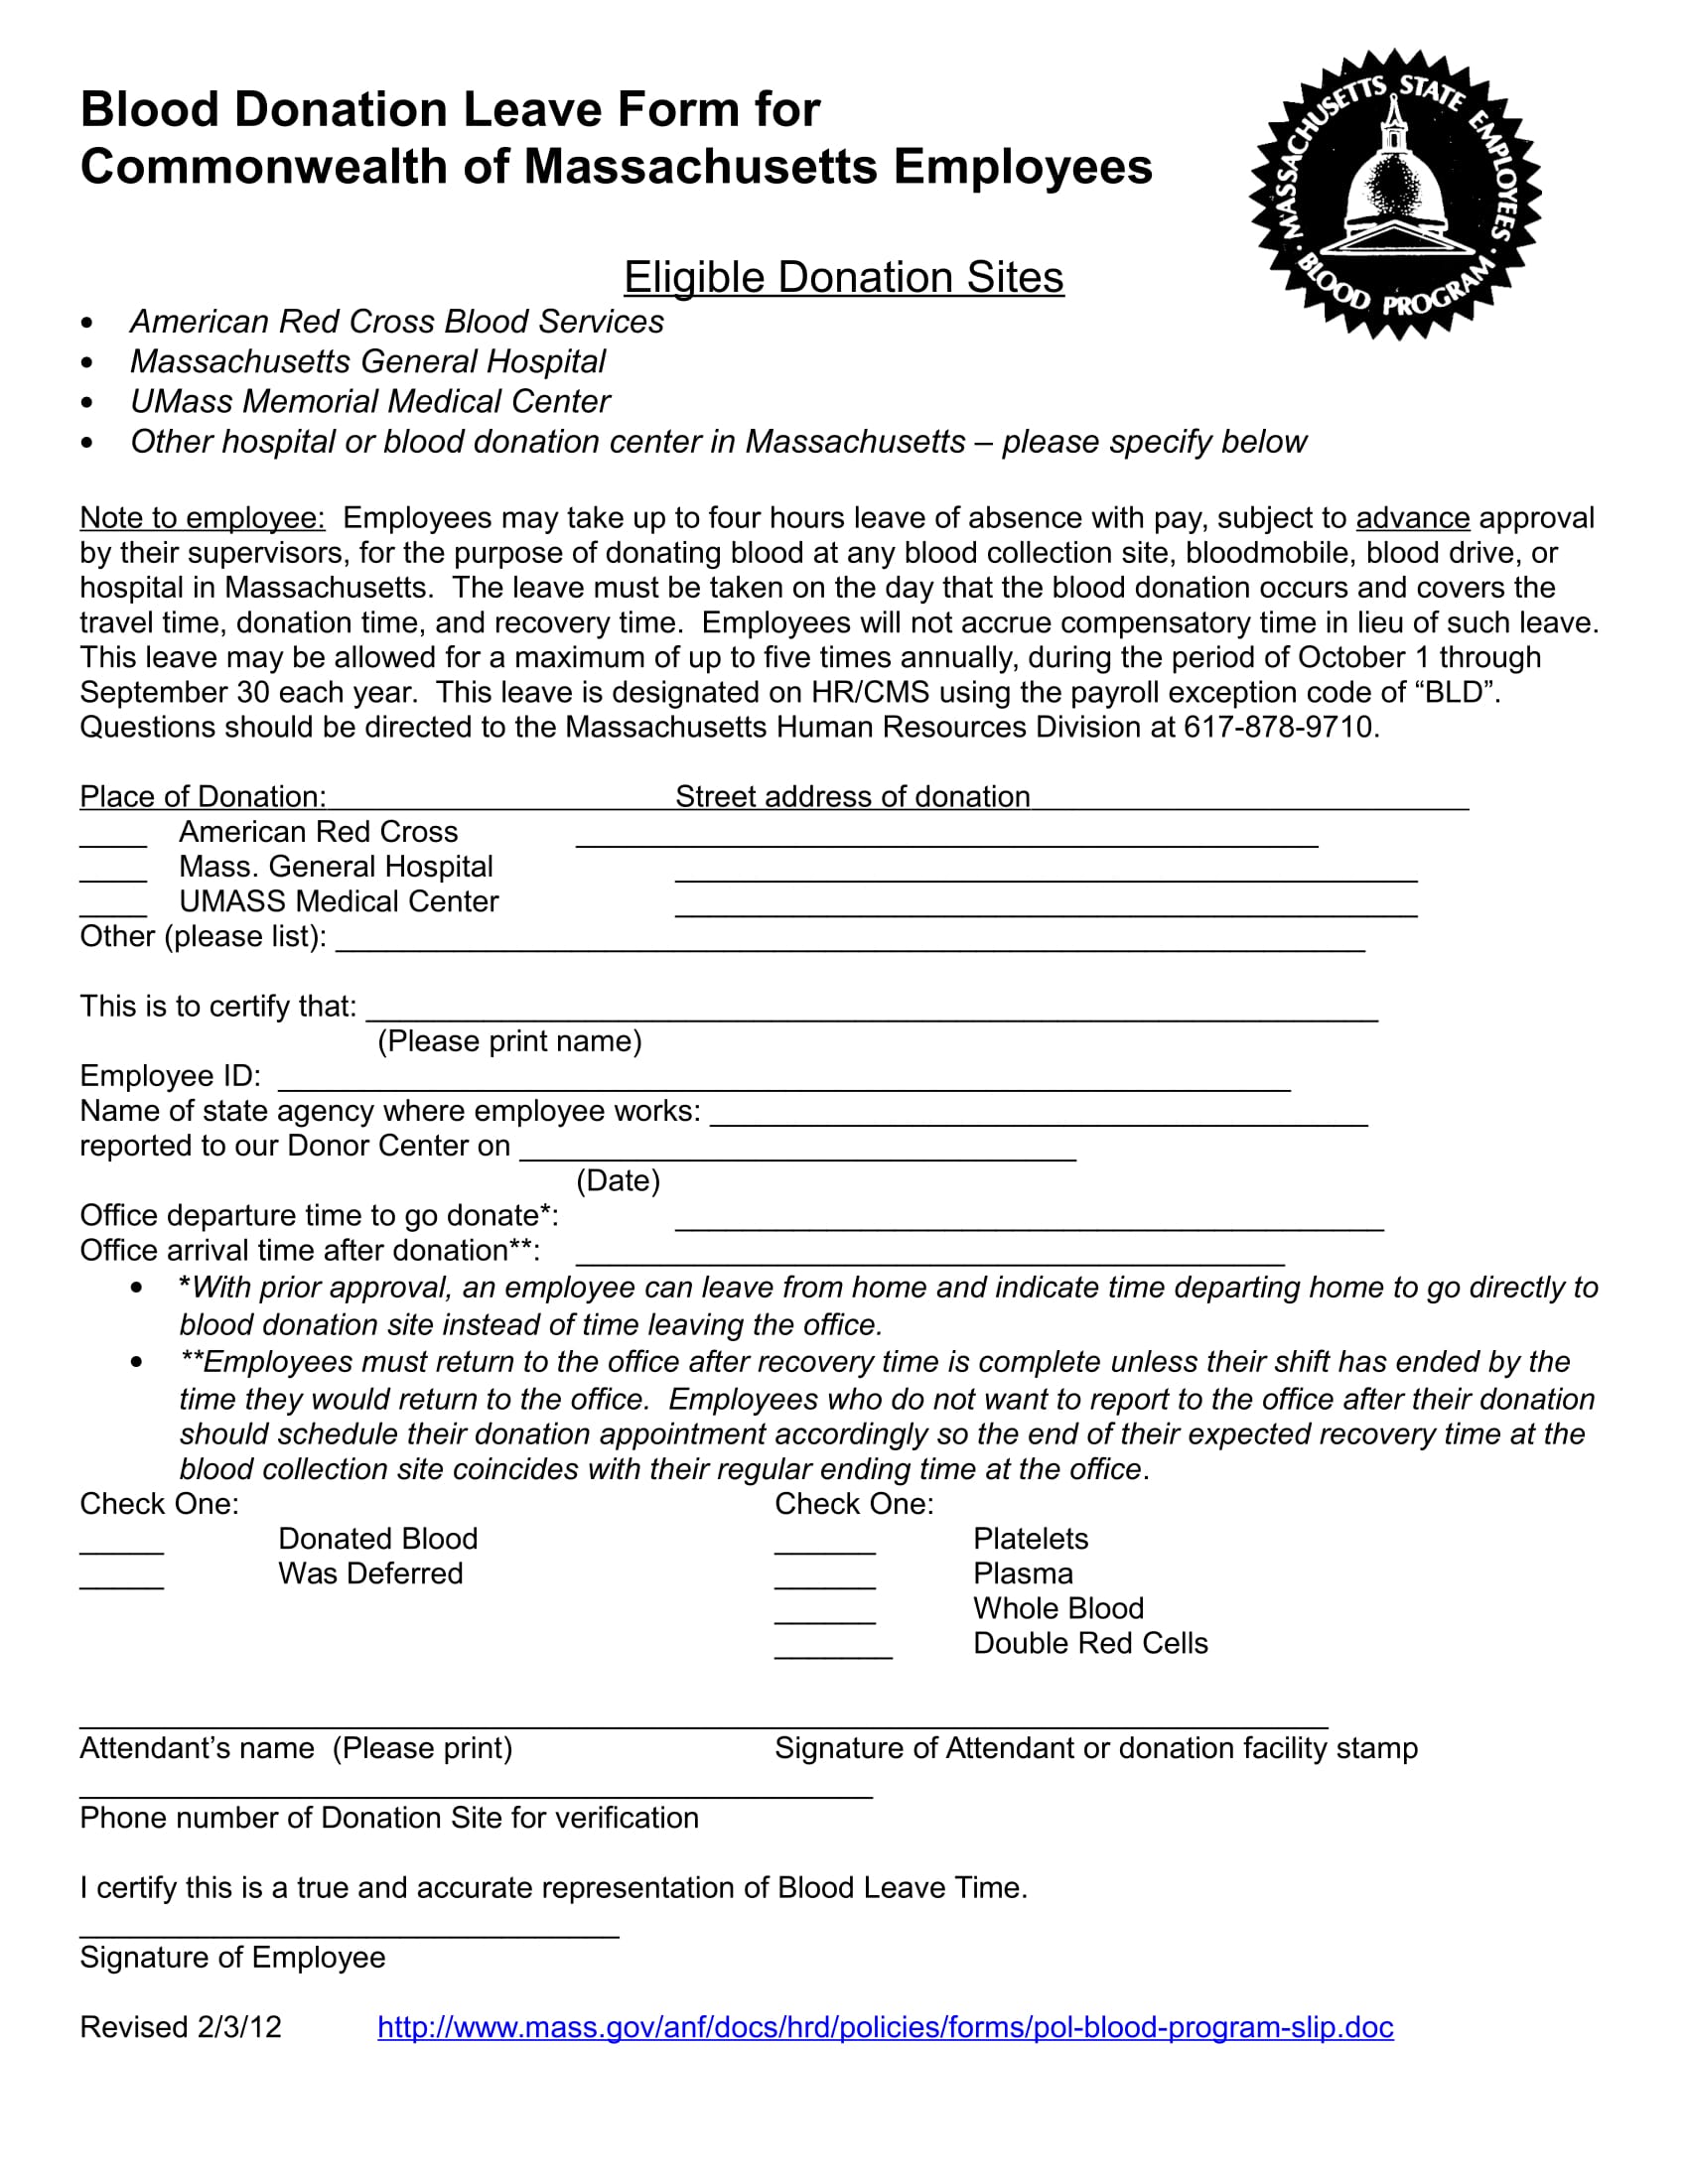 blood donation leave form in doc 1